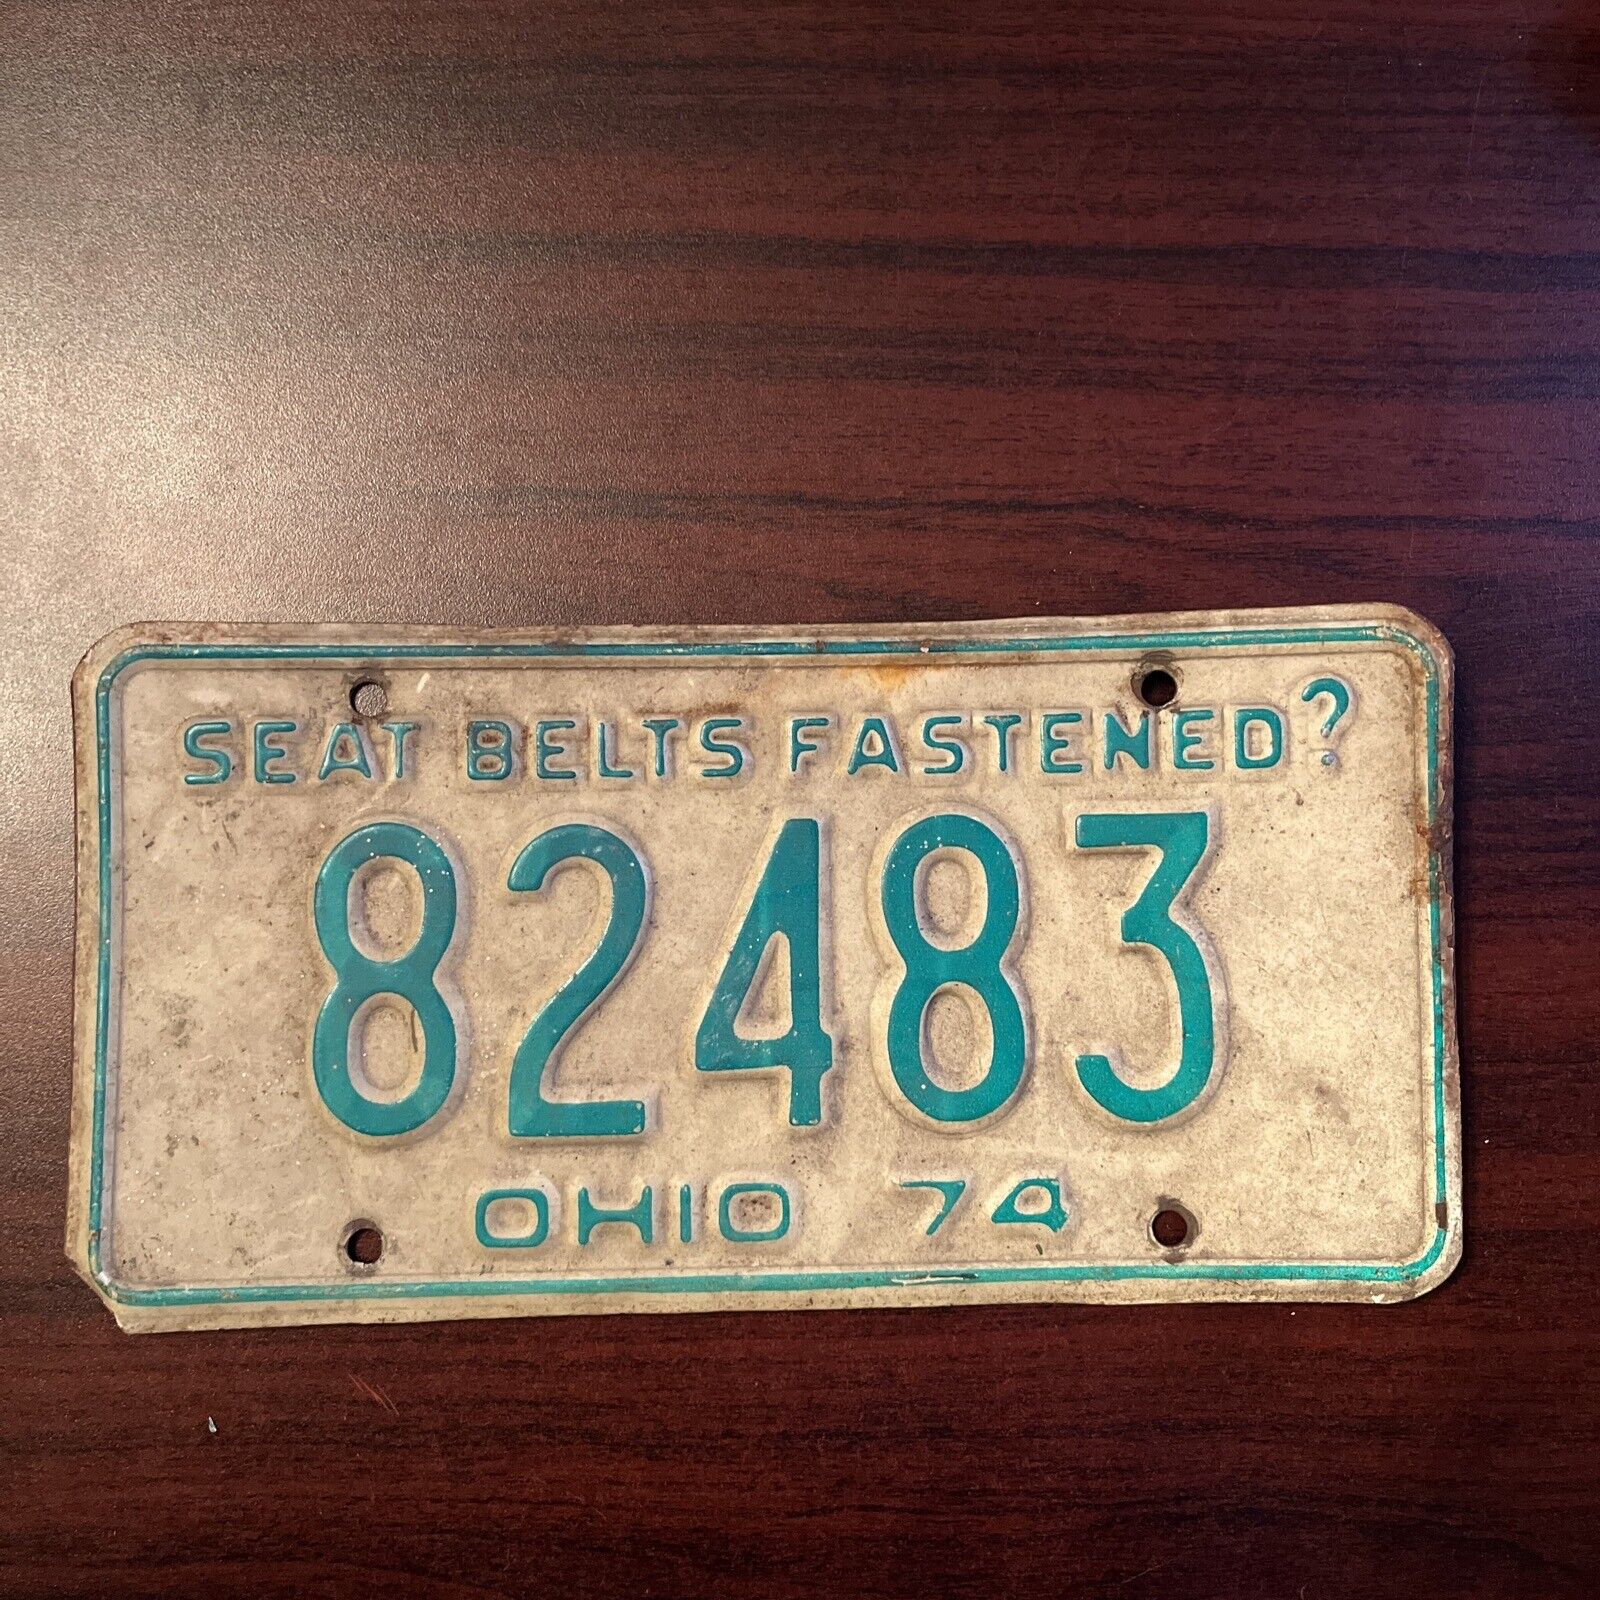 1974 Ohio License Plate “Seat Belts Fastened?” 82483